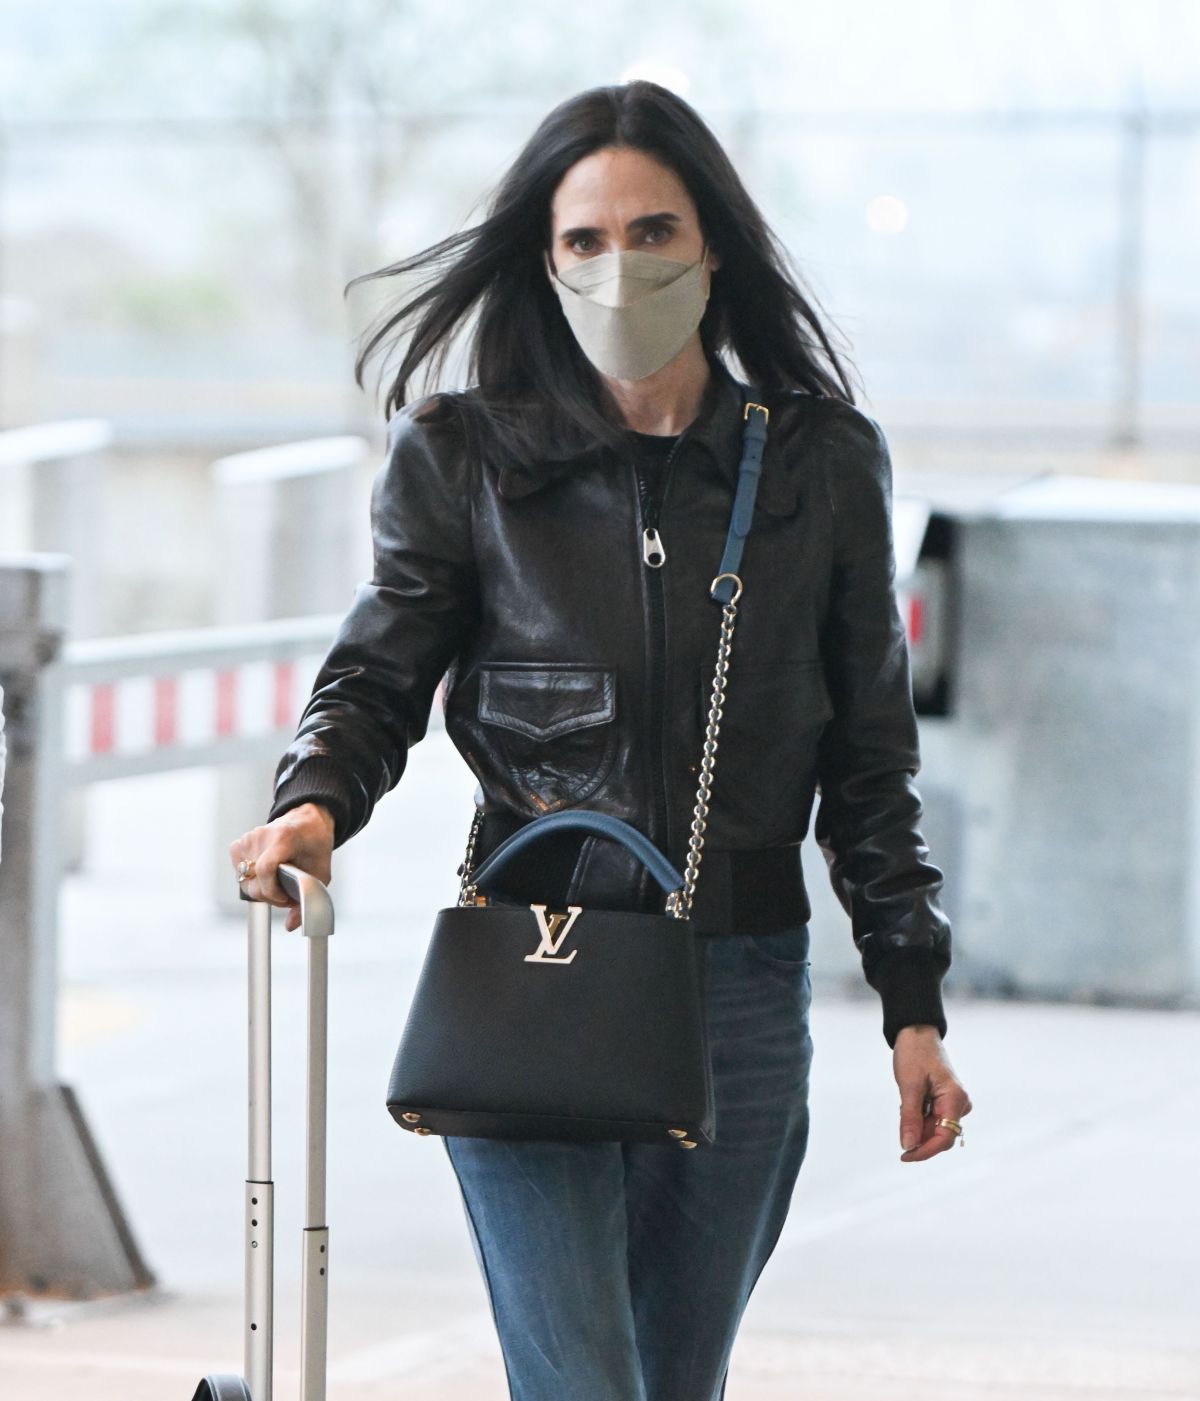 Jennifer Connelly arriving at JFK airport with her children New York City,  USA - 09.09.09 Stock Photo - Alamy